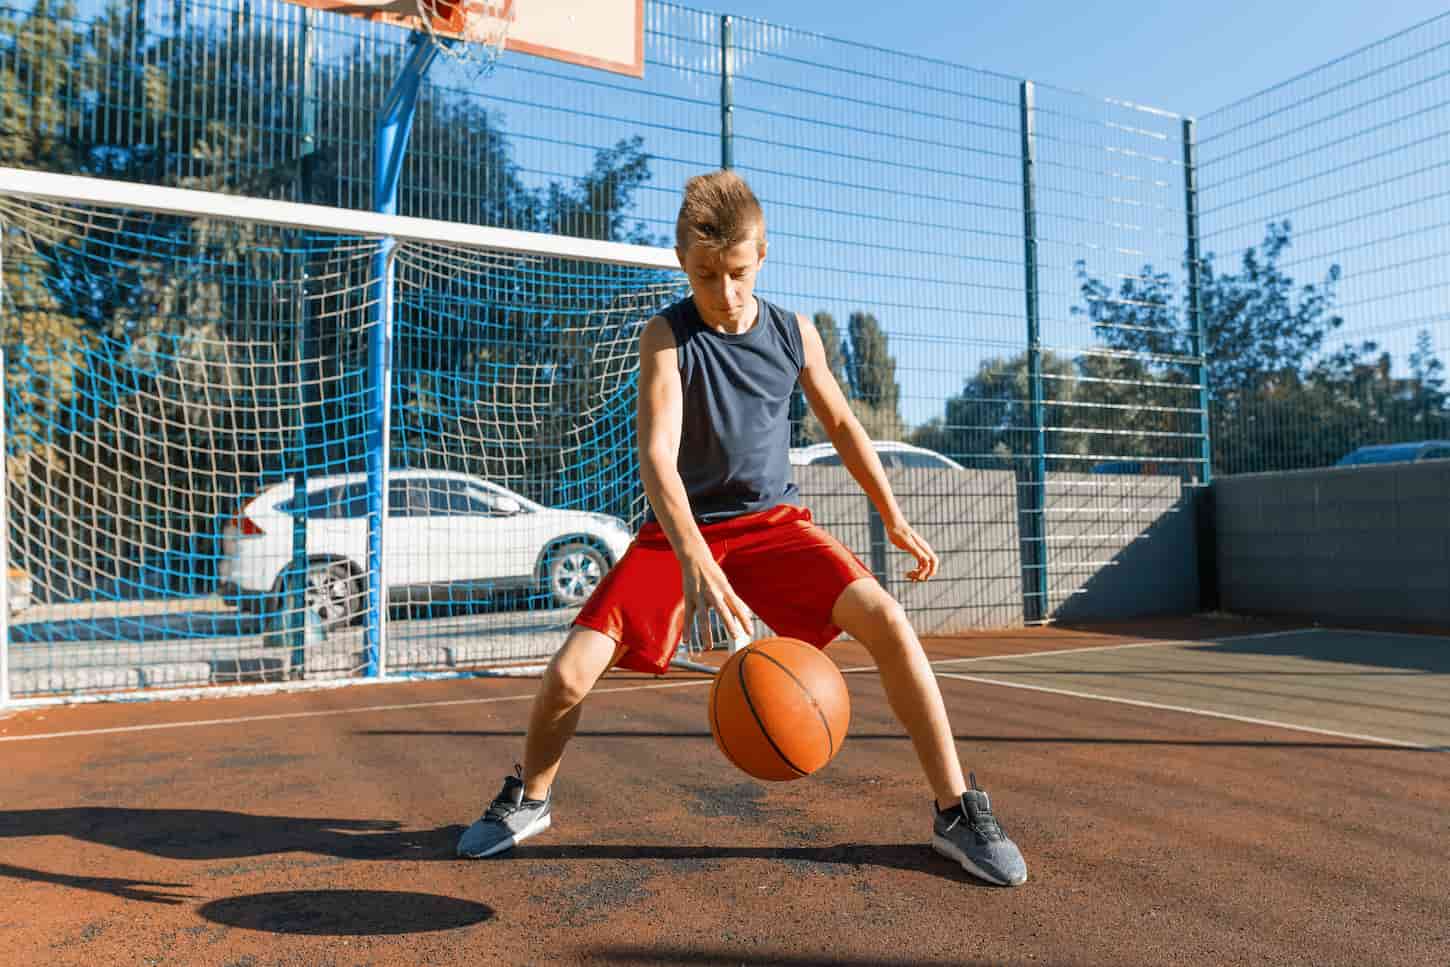 An image of a Caucasian teenage boy street basketball player with a ball on an outdoor city basketball court.